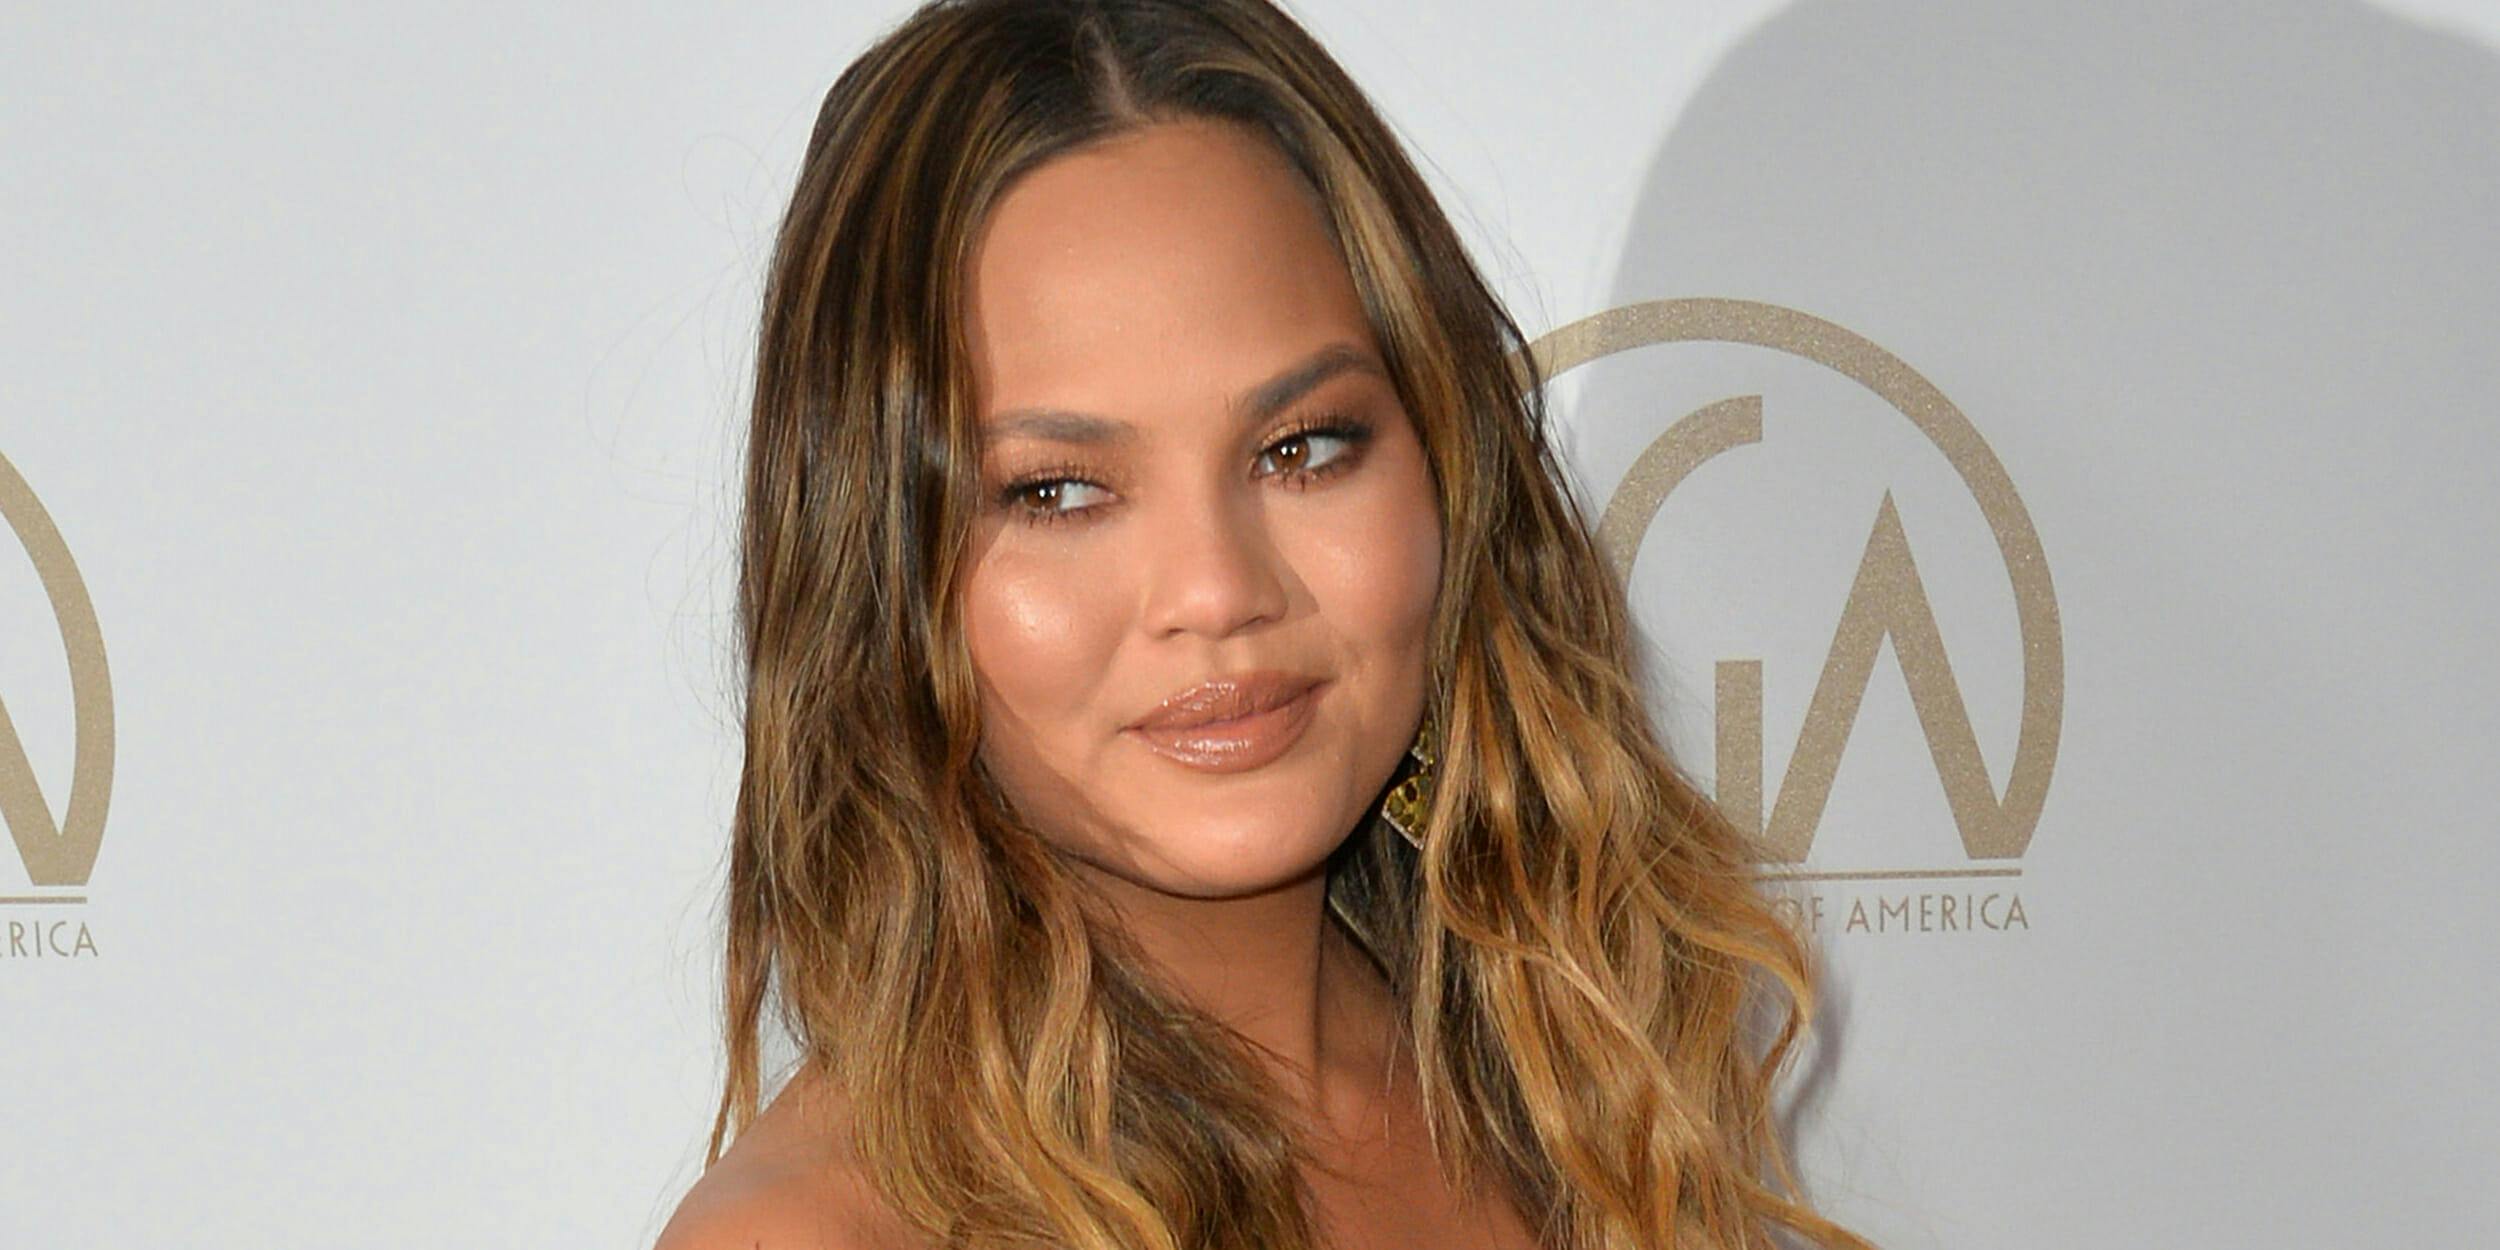 Chrissy Teigen is extremely here for this full-frontal naked dating show